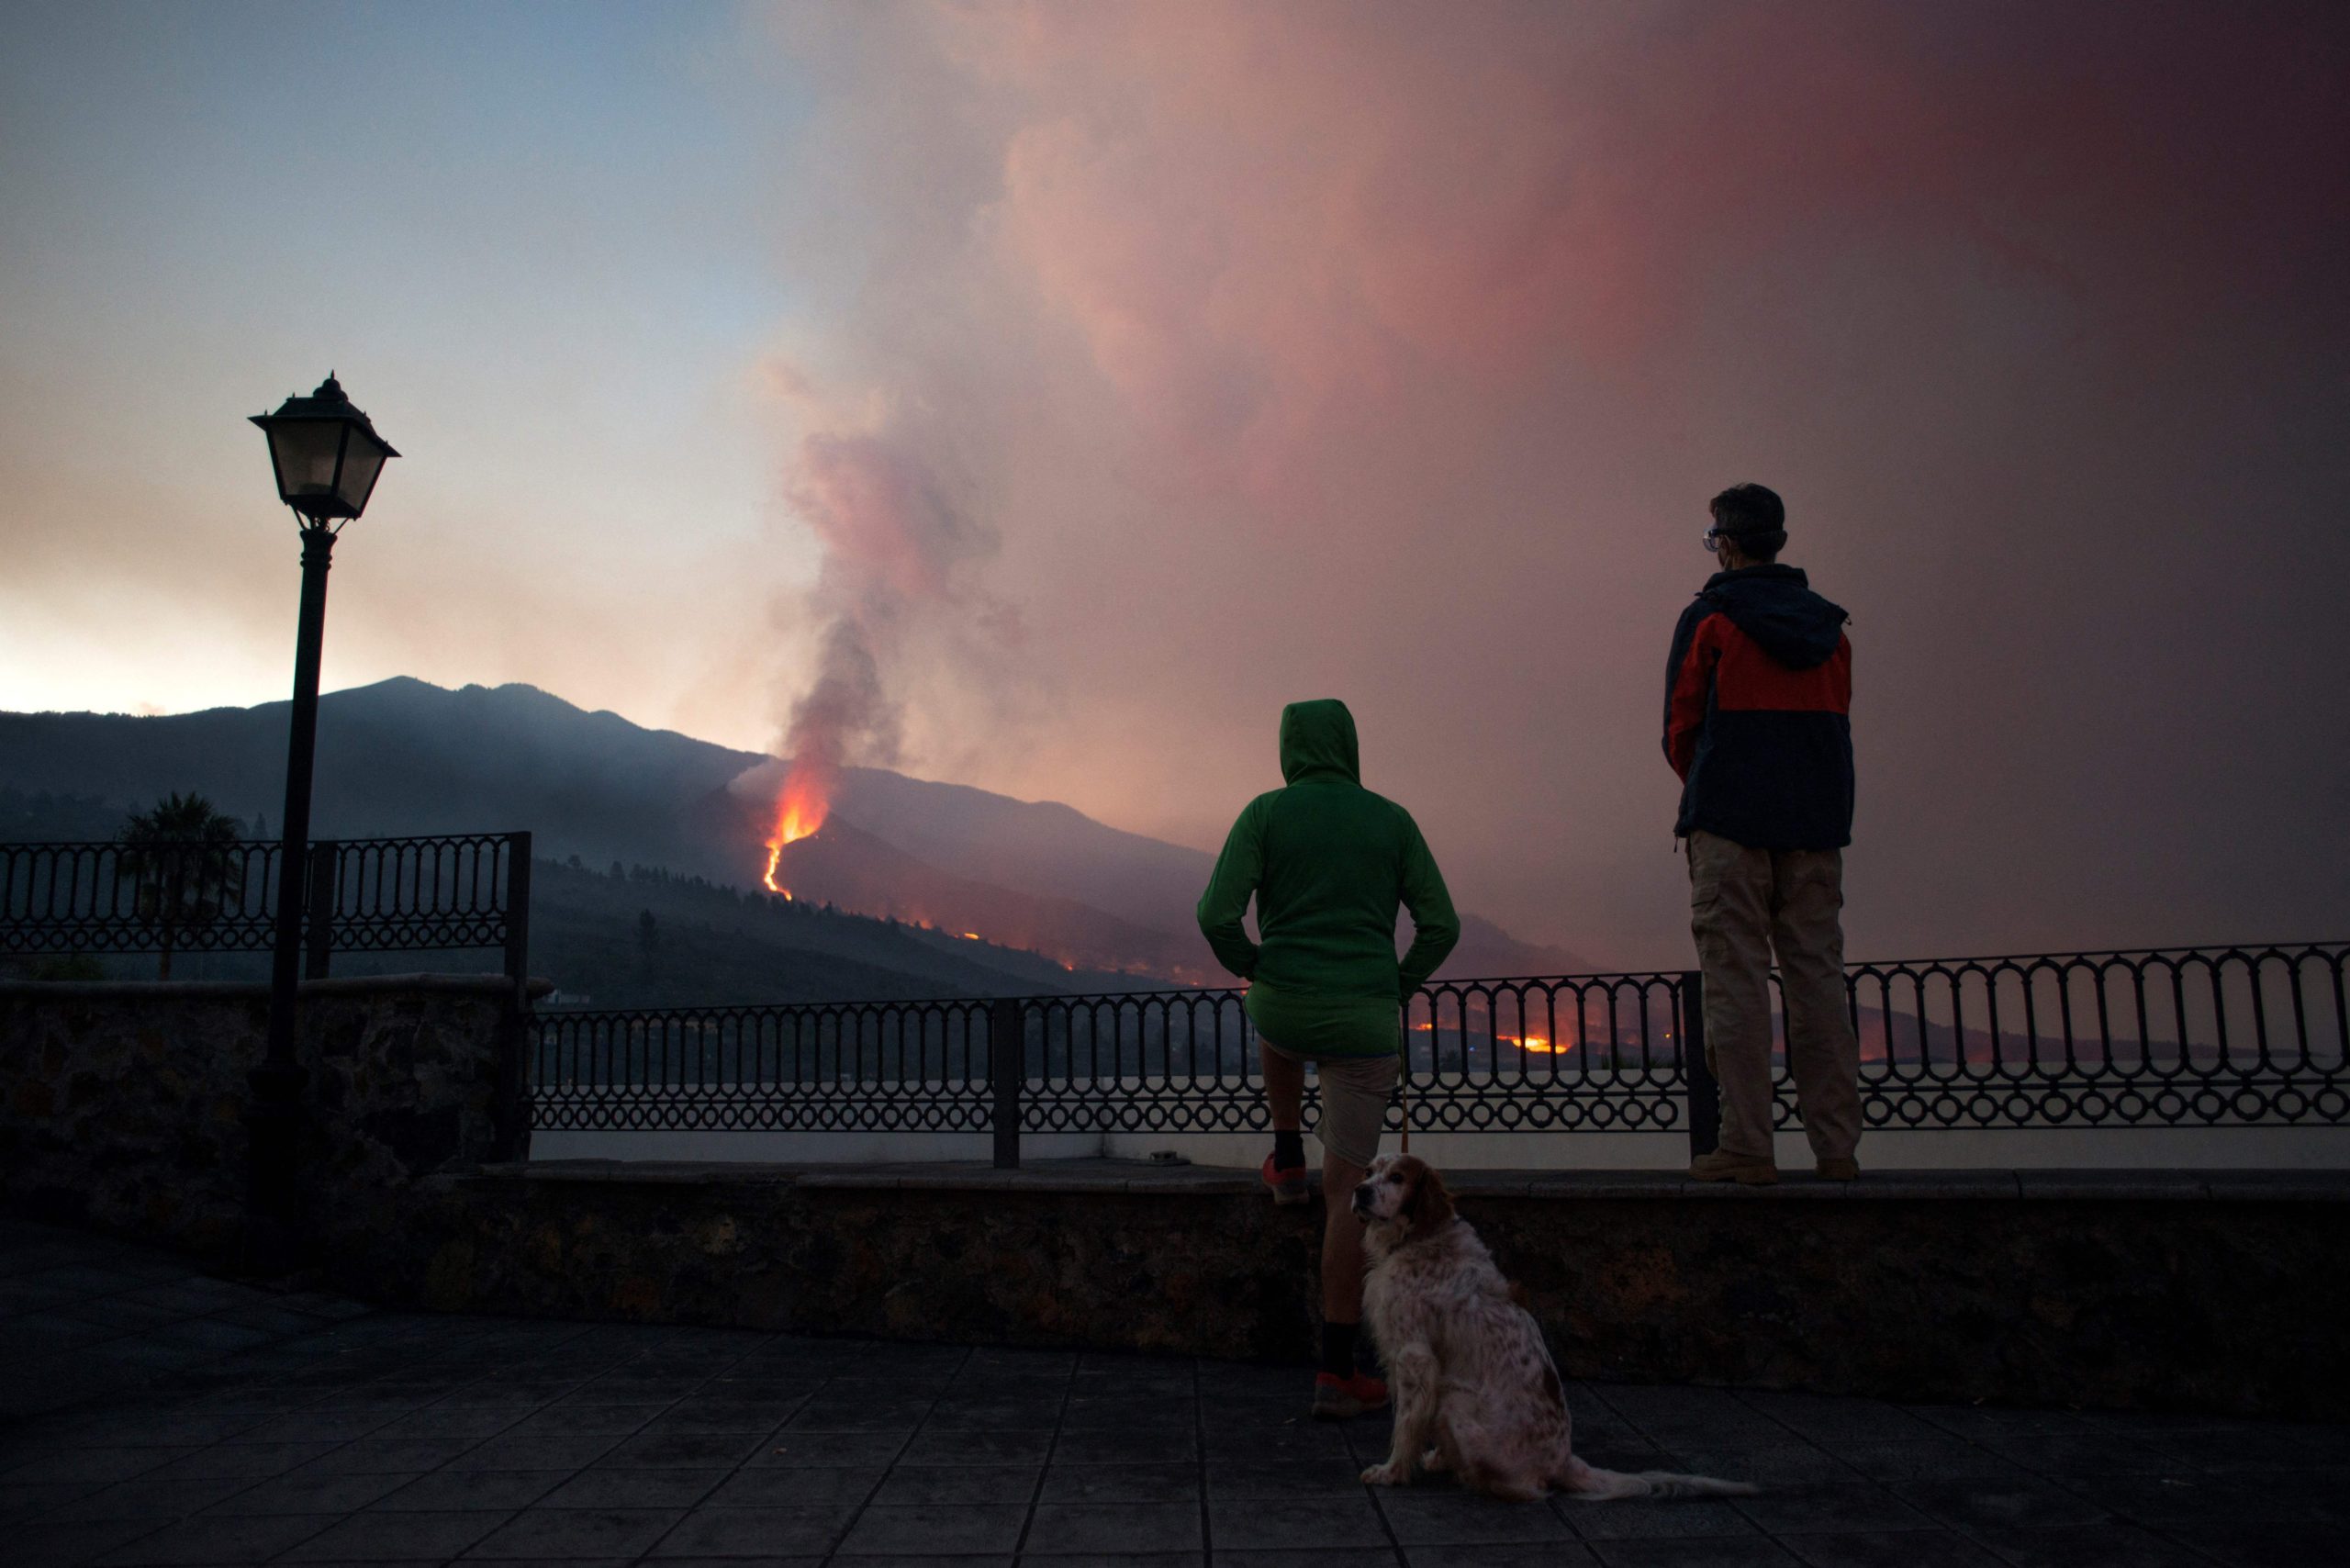 People observe as the Cumbre Vieja volcano spews lava, ash and smoke, in Los Llanos de Aridane, in the Canary Island of La Palma on October 10, 2021. (Photo: Jorge Guerrero/AFP, Getty Images)